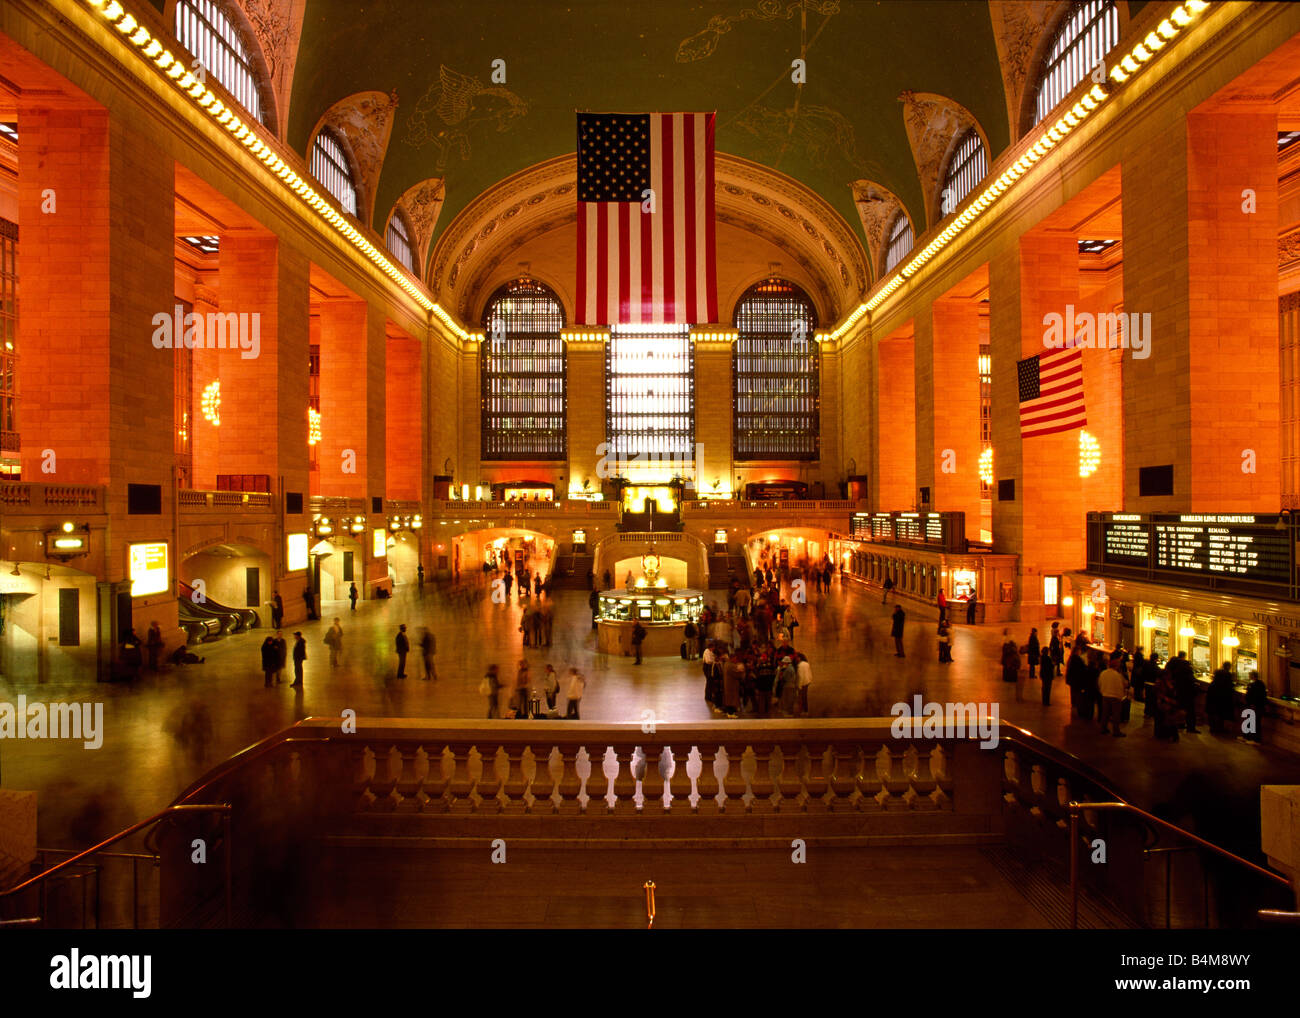 Grand Central Station, New York, USA Banque D'Images